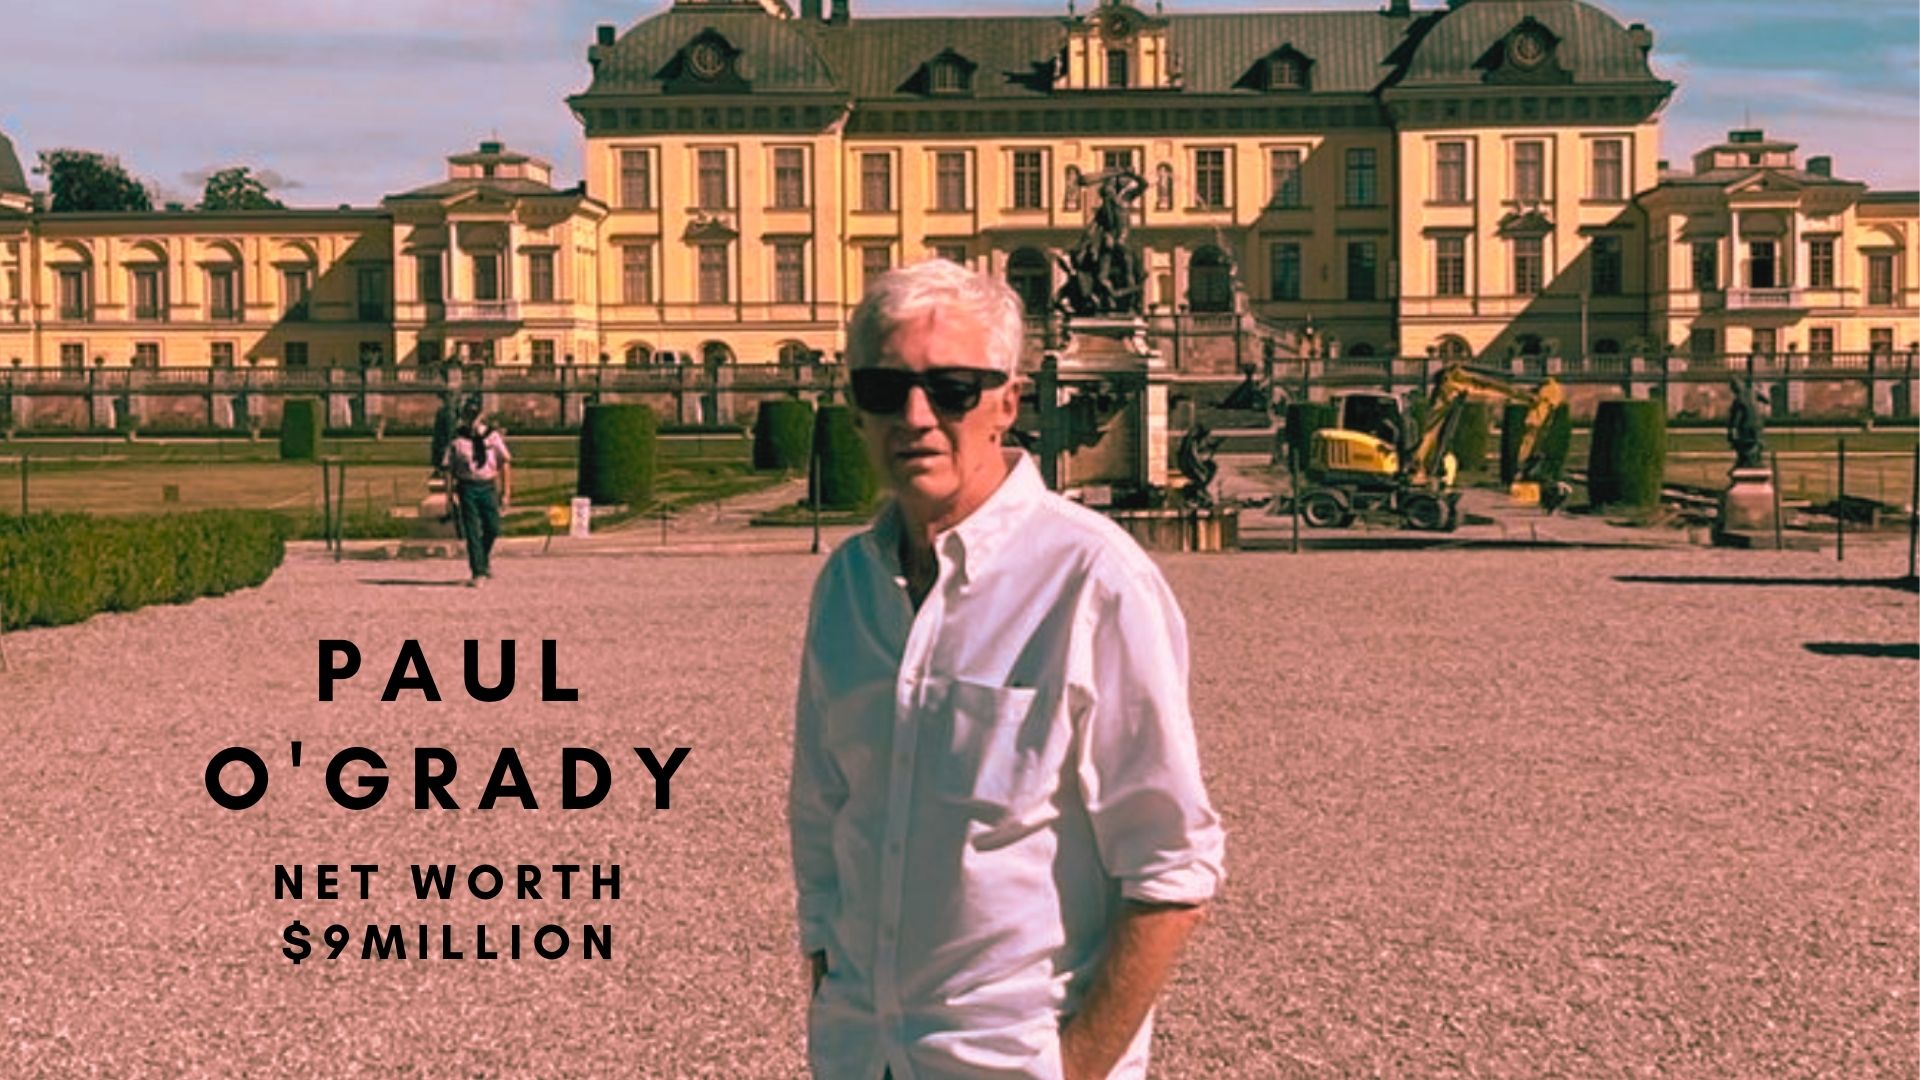 Paul O'Grady is a British comedian, actor, and television personality. (Credits: @paulogrady Instagram)